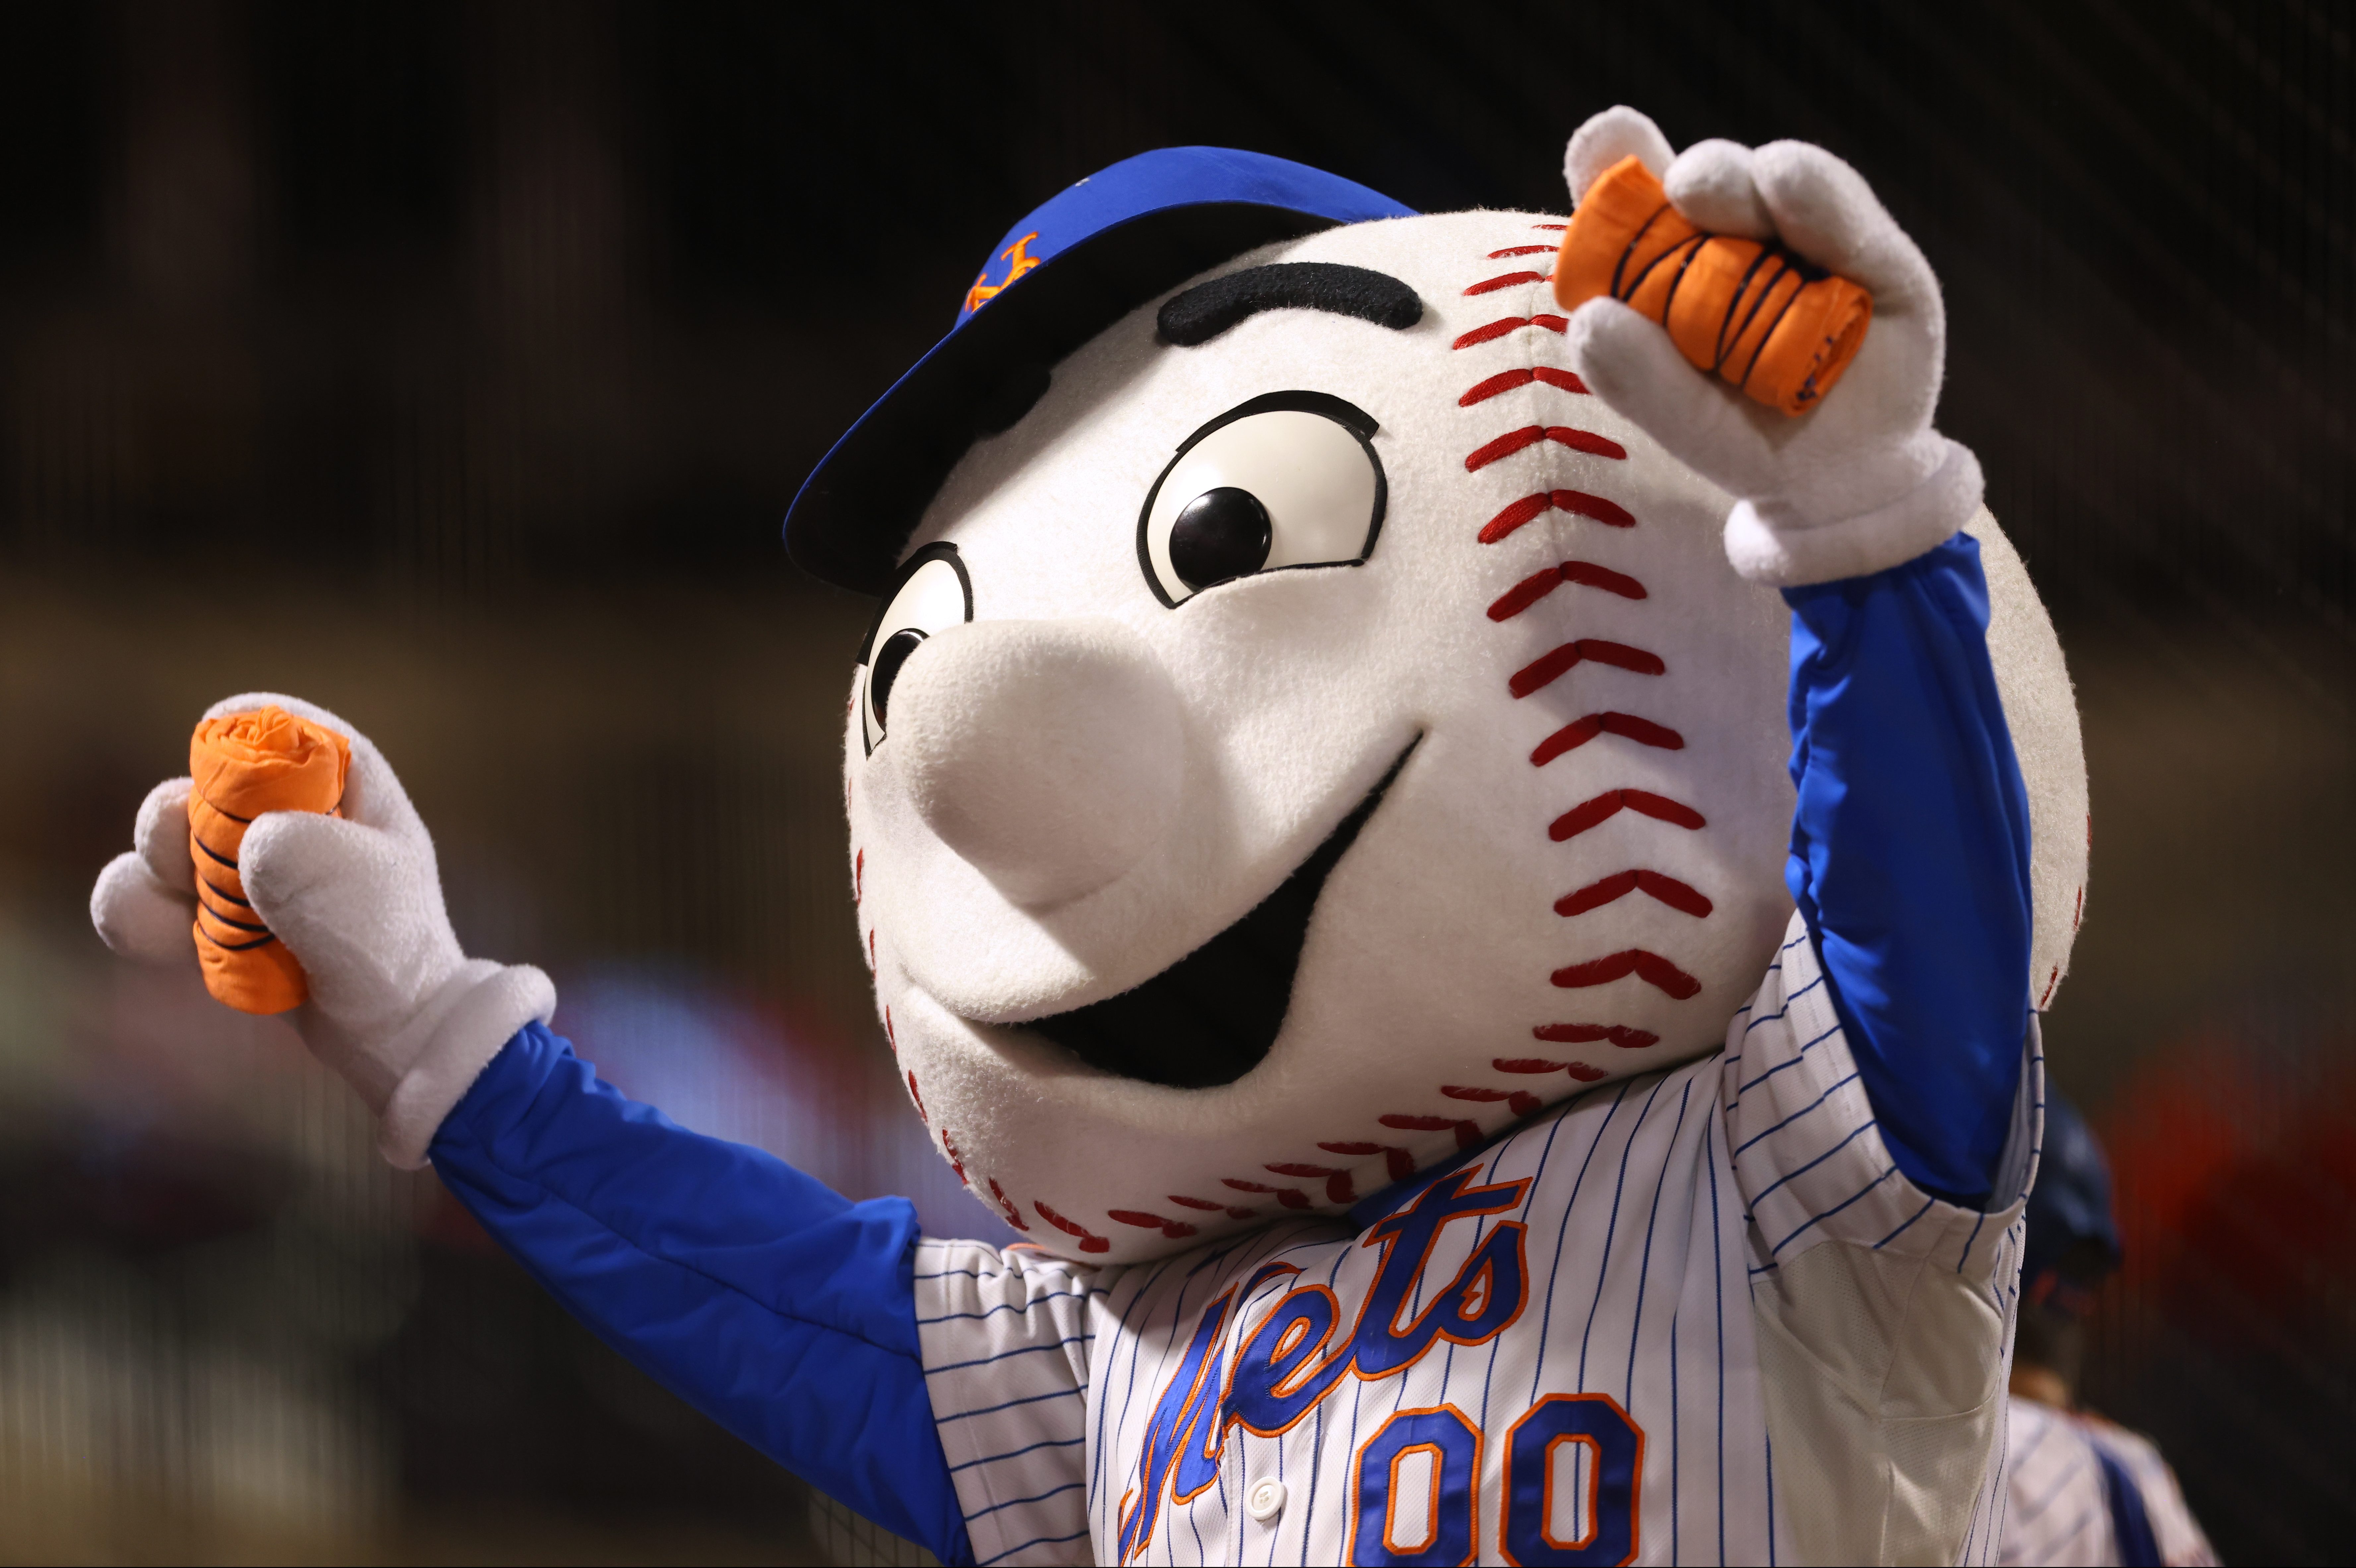 The mascot Mr. Met at a game between the Pirates and Mets at Citi Field with his hands up in the air